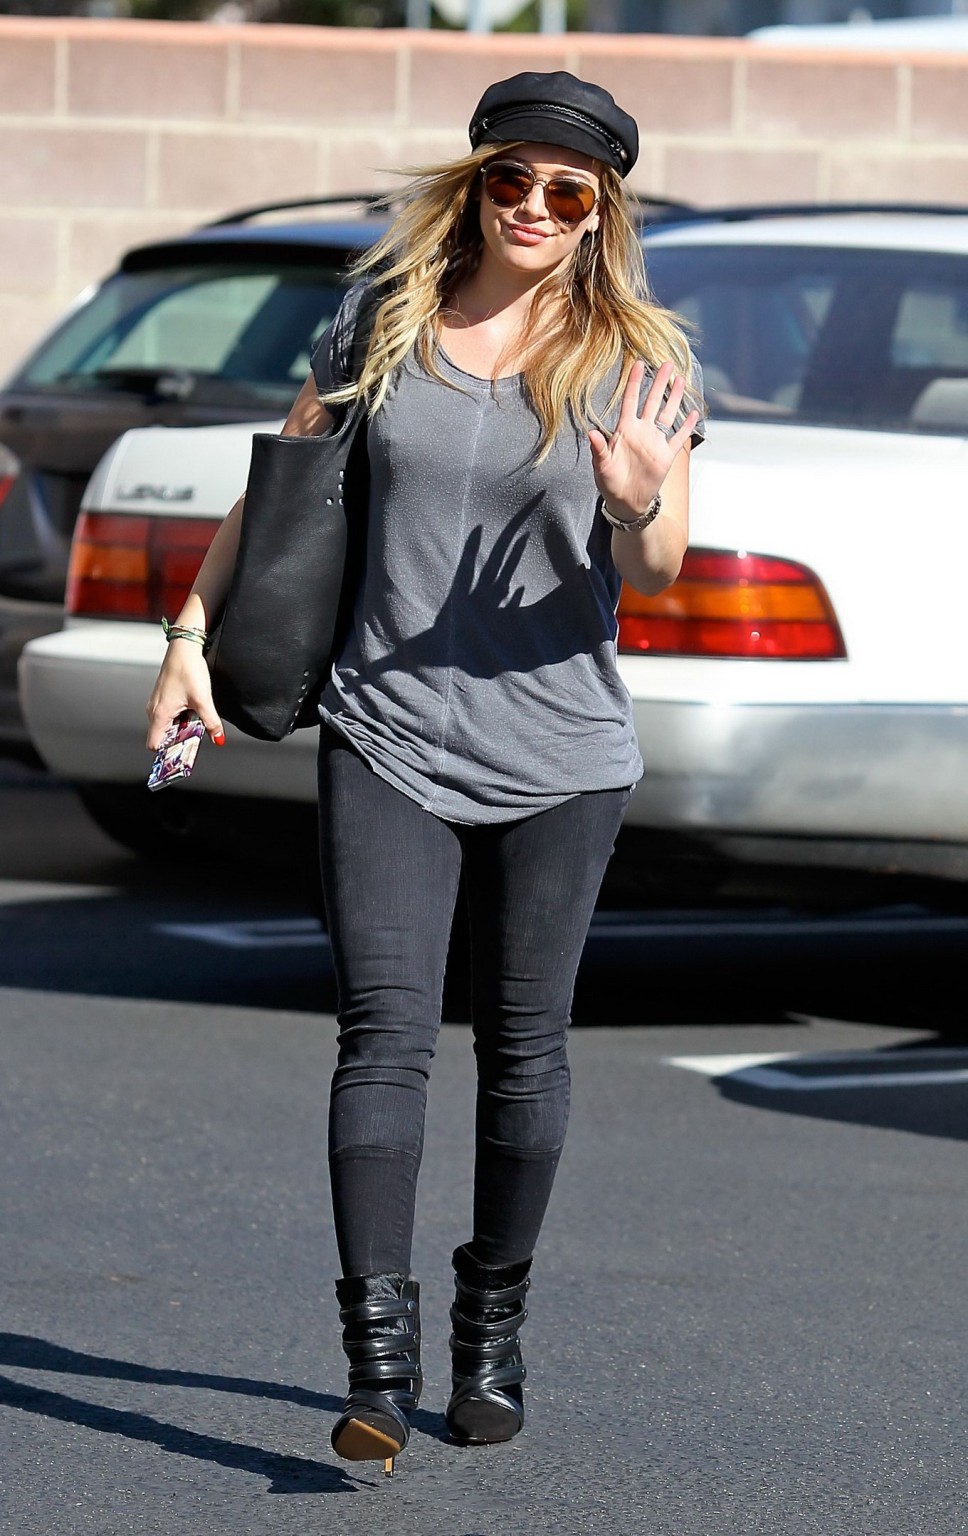 Hilary Duff showing hard pokies in a gray top and tight jeans out in Santa Monic #75213805